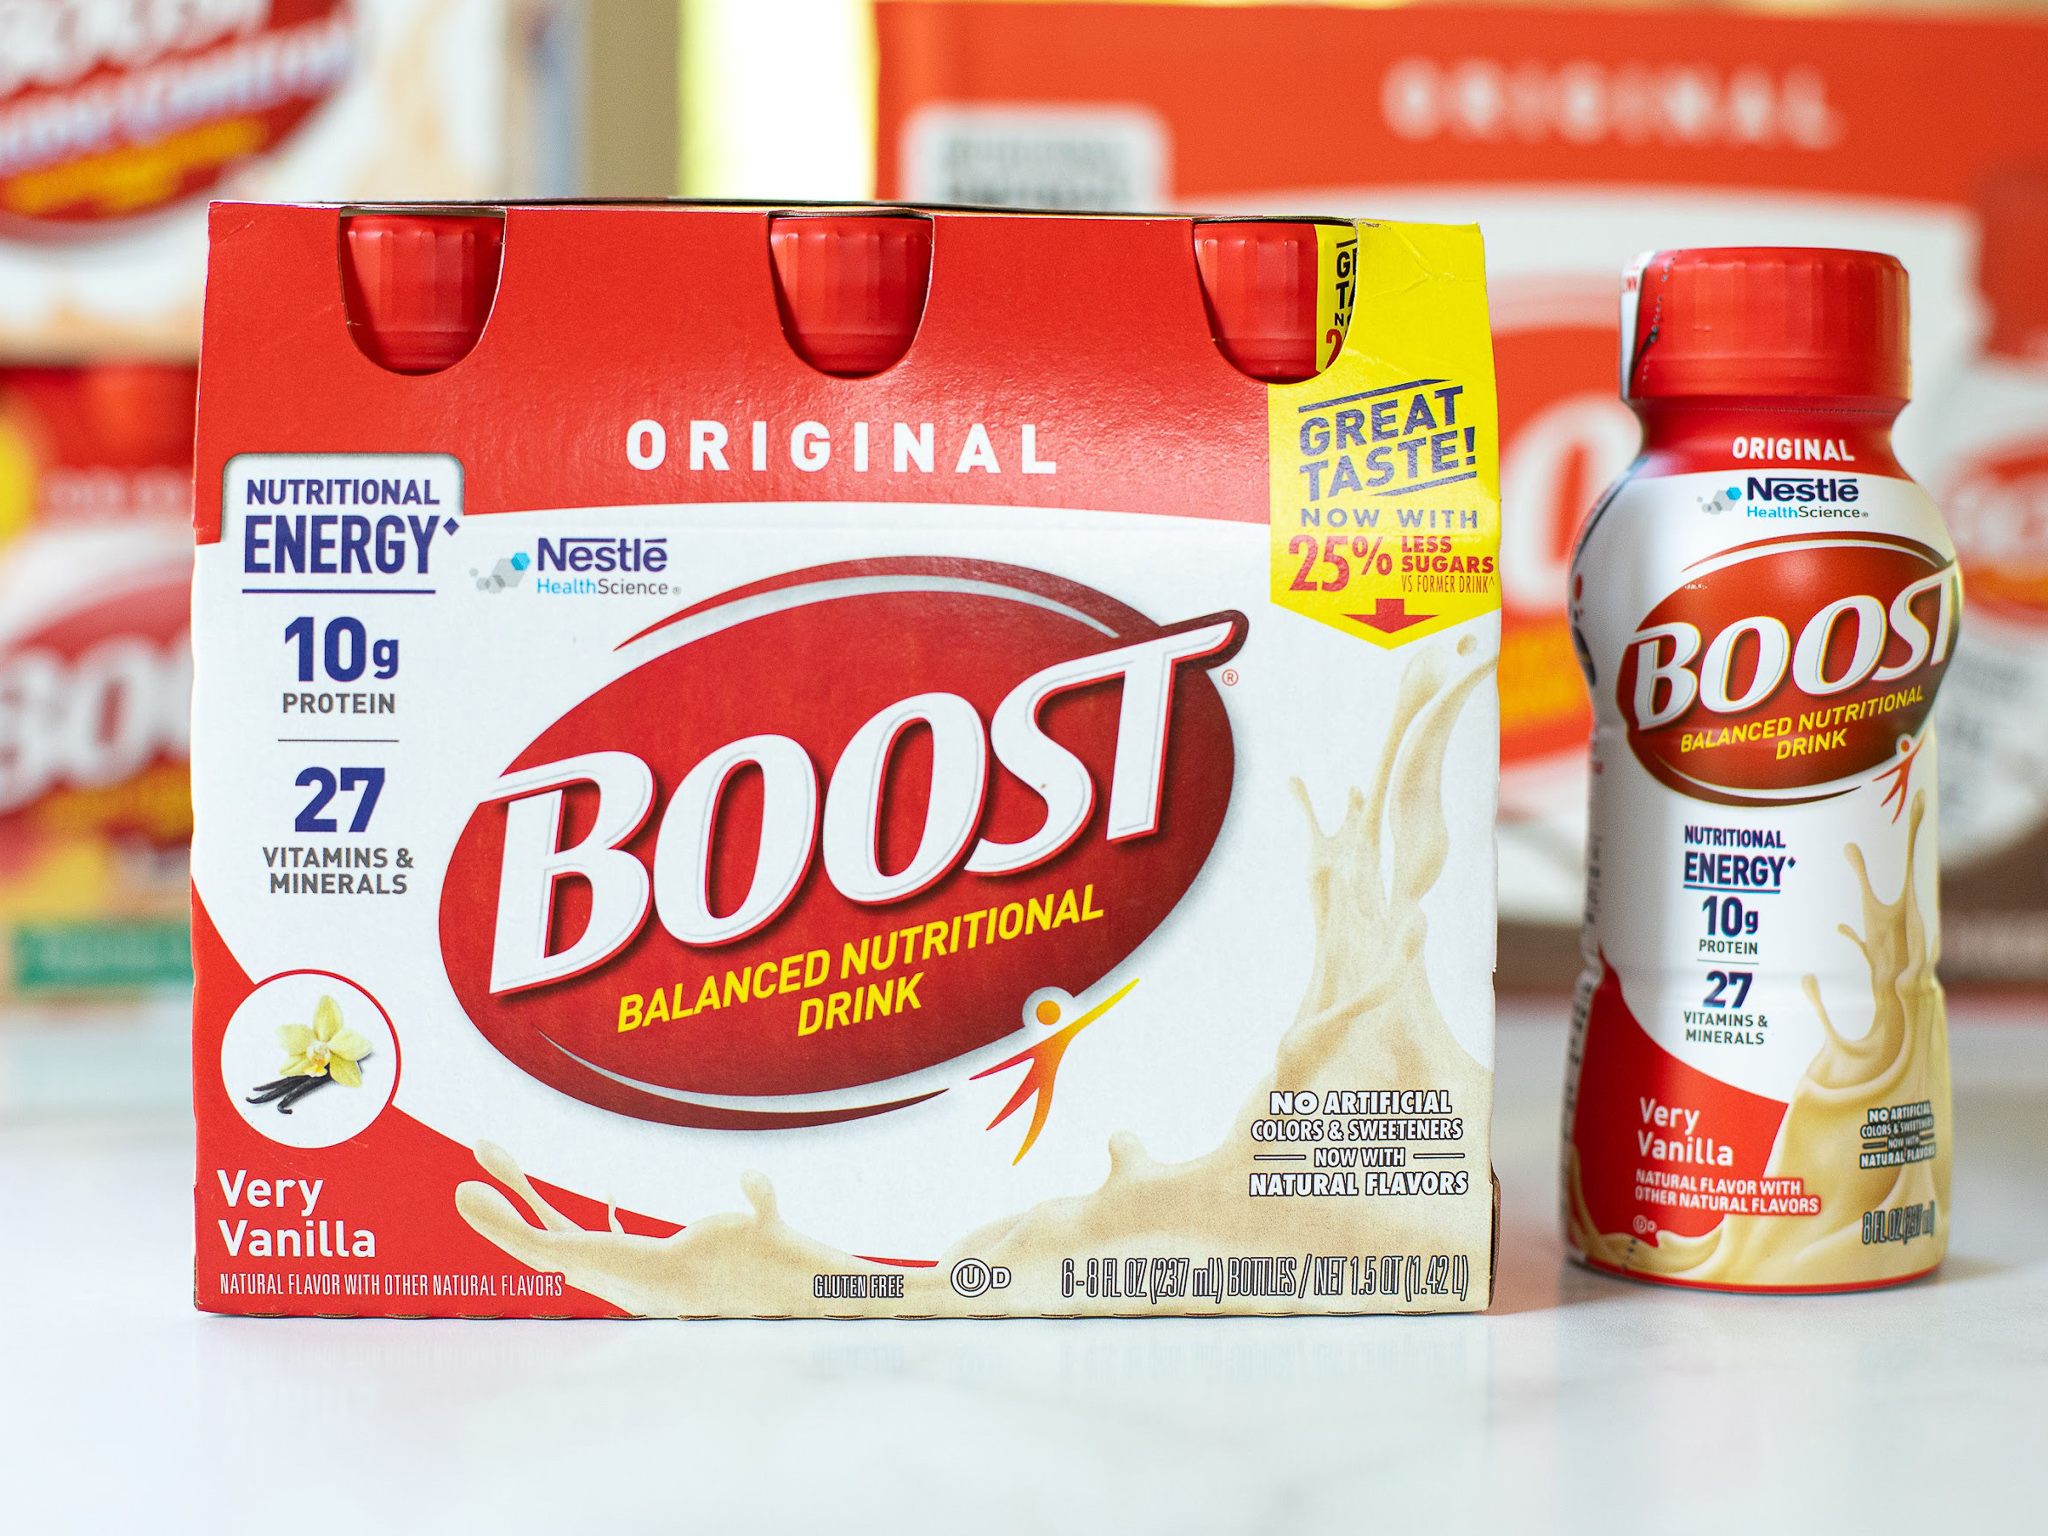 Get Boost Nutritional Drinks As Low As $1.99 Per Pack At Publix (Regular Price $9.49)